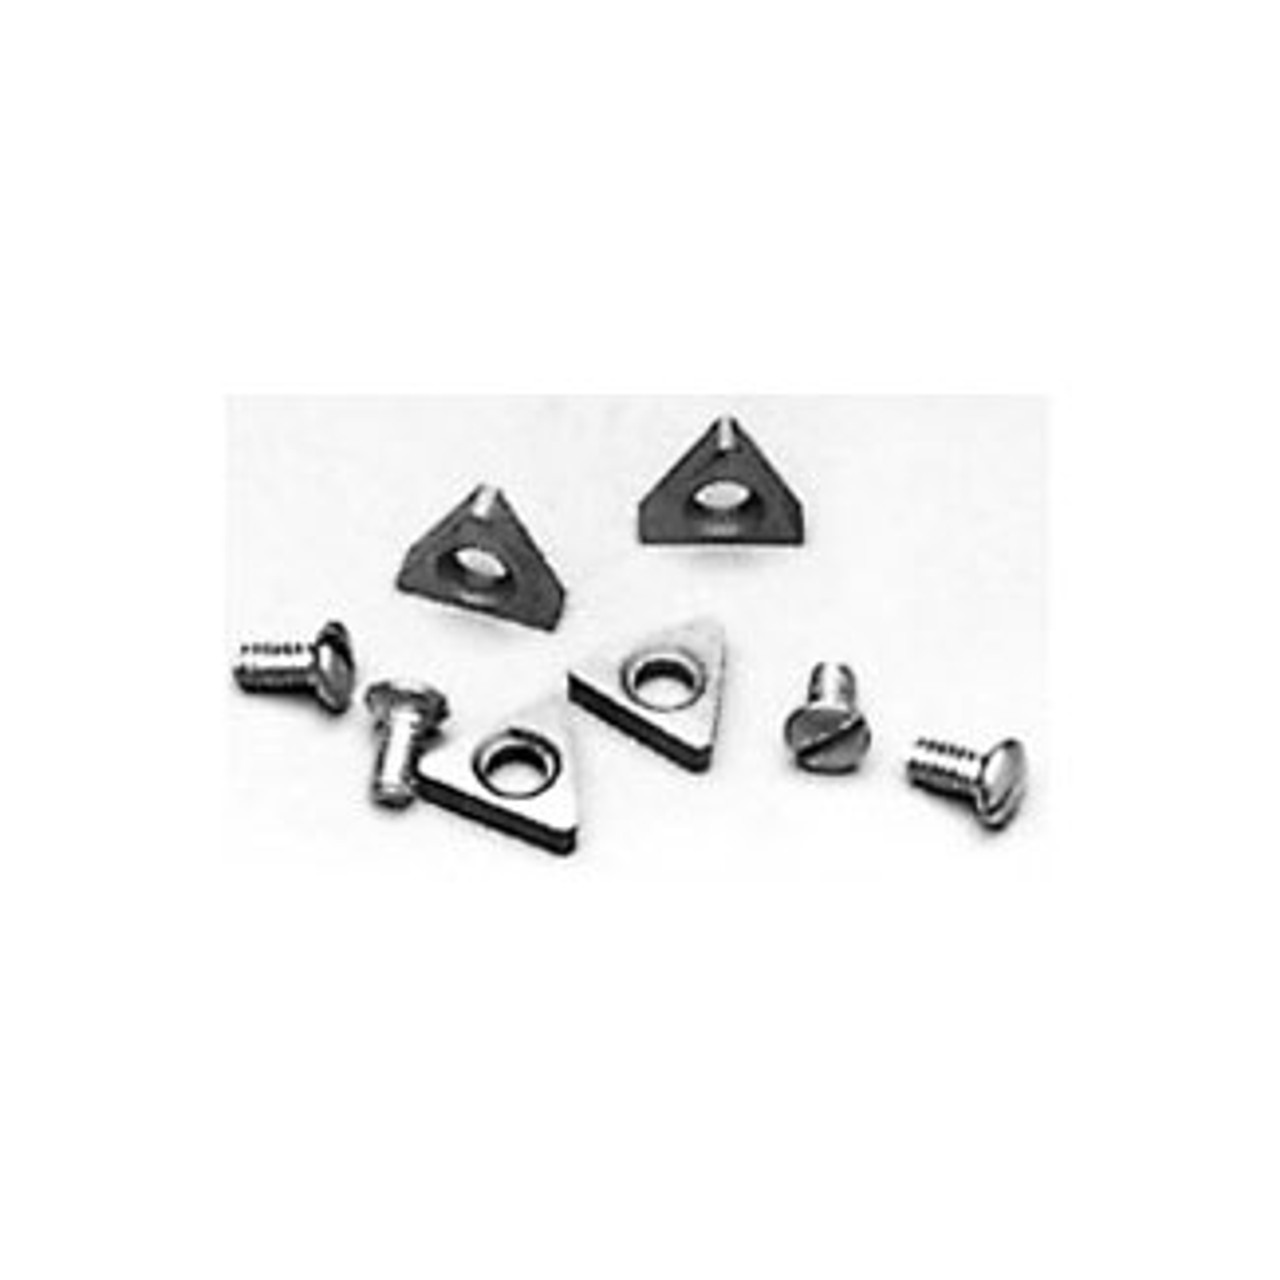 Accu-Turn Style Combination Carbide Bits (5 Pack)